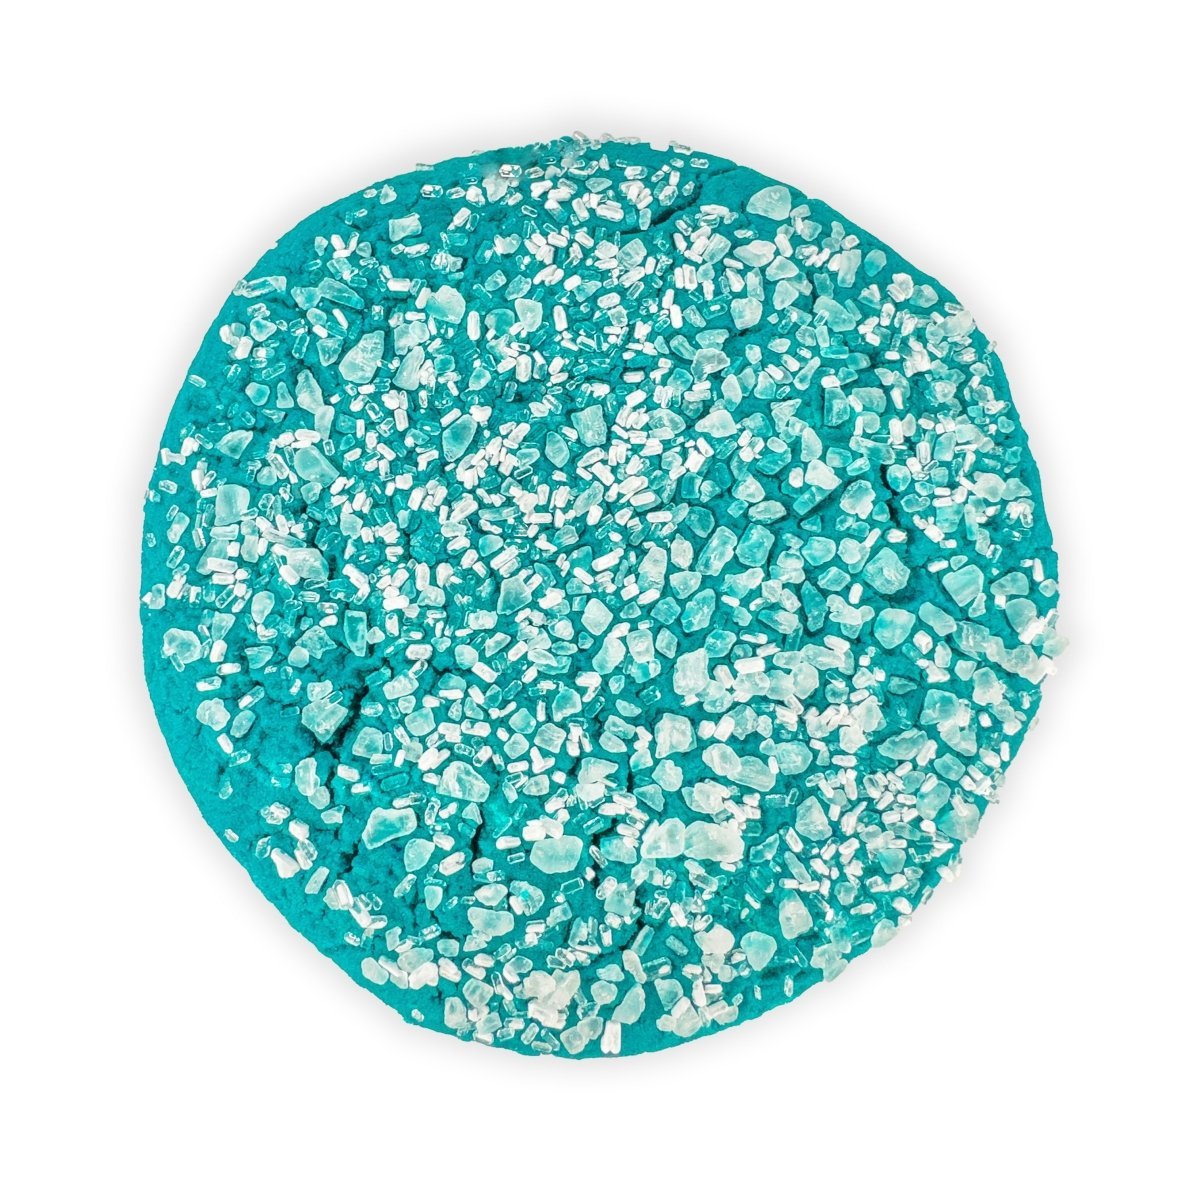 Recover Bubble Bath Bar for Kids & Adults - Colourful Glitter With Epsom Salts - Made in Australia by Bath Box